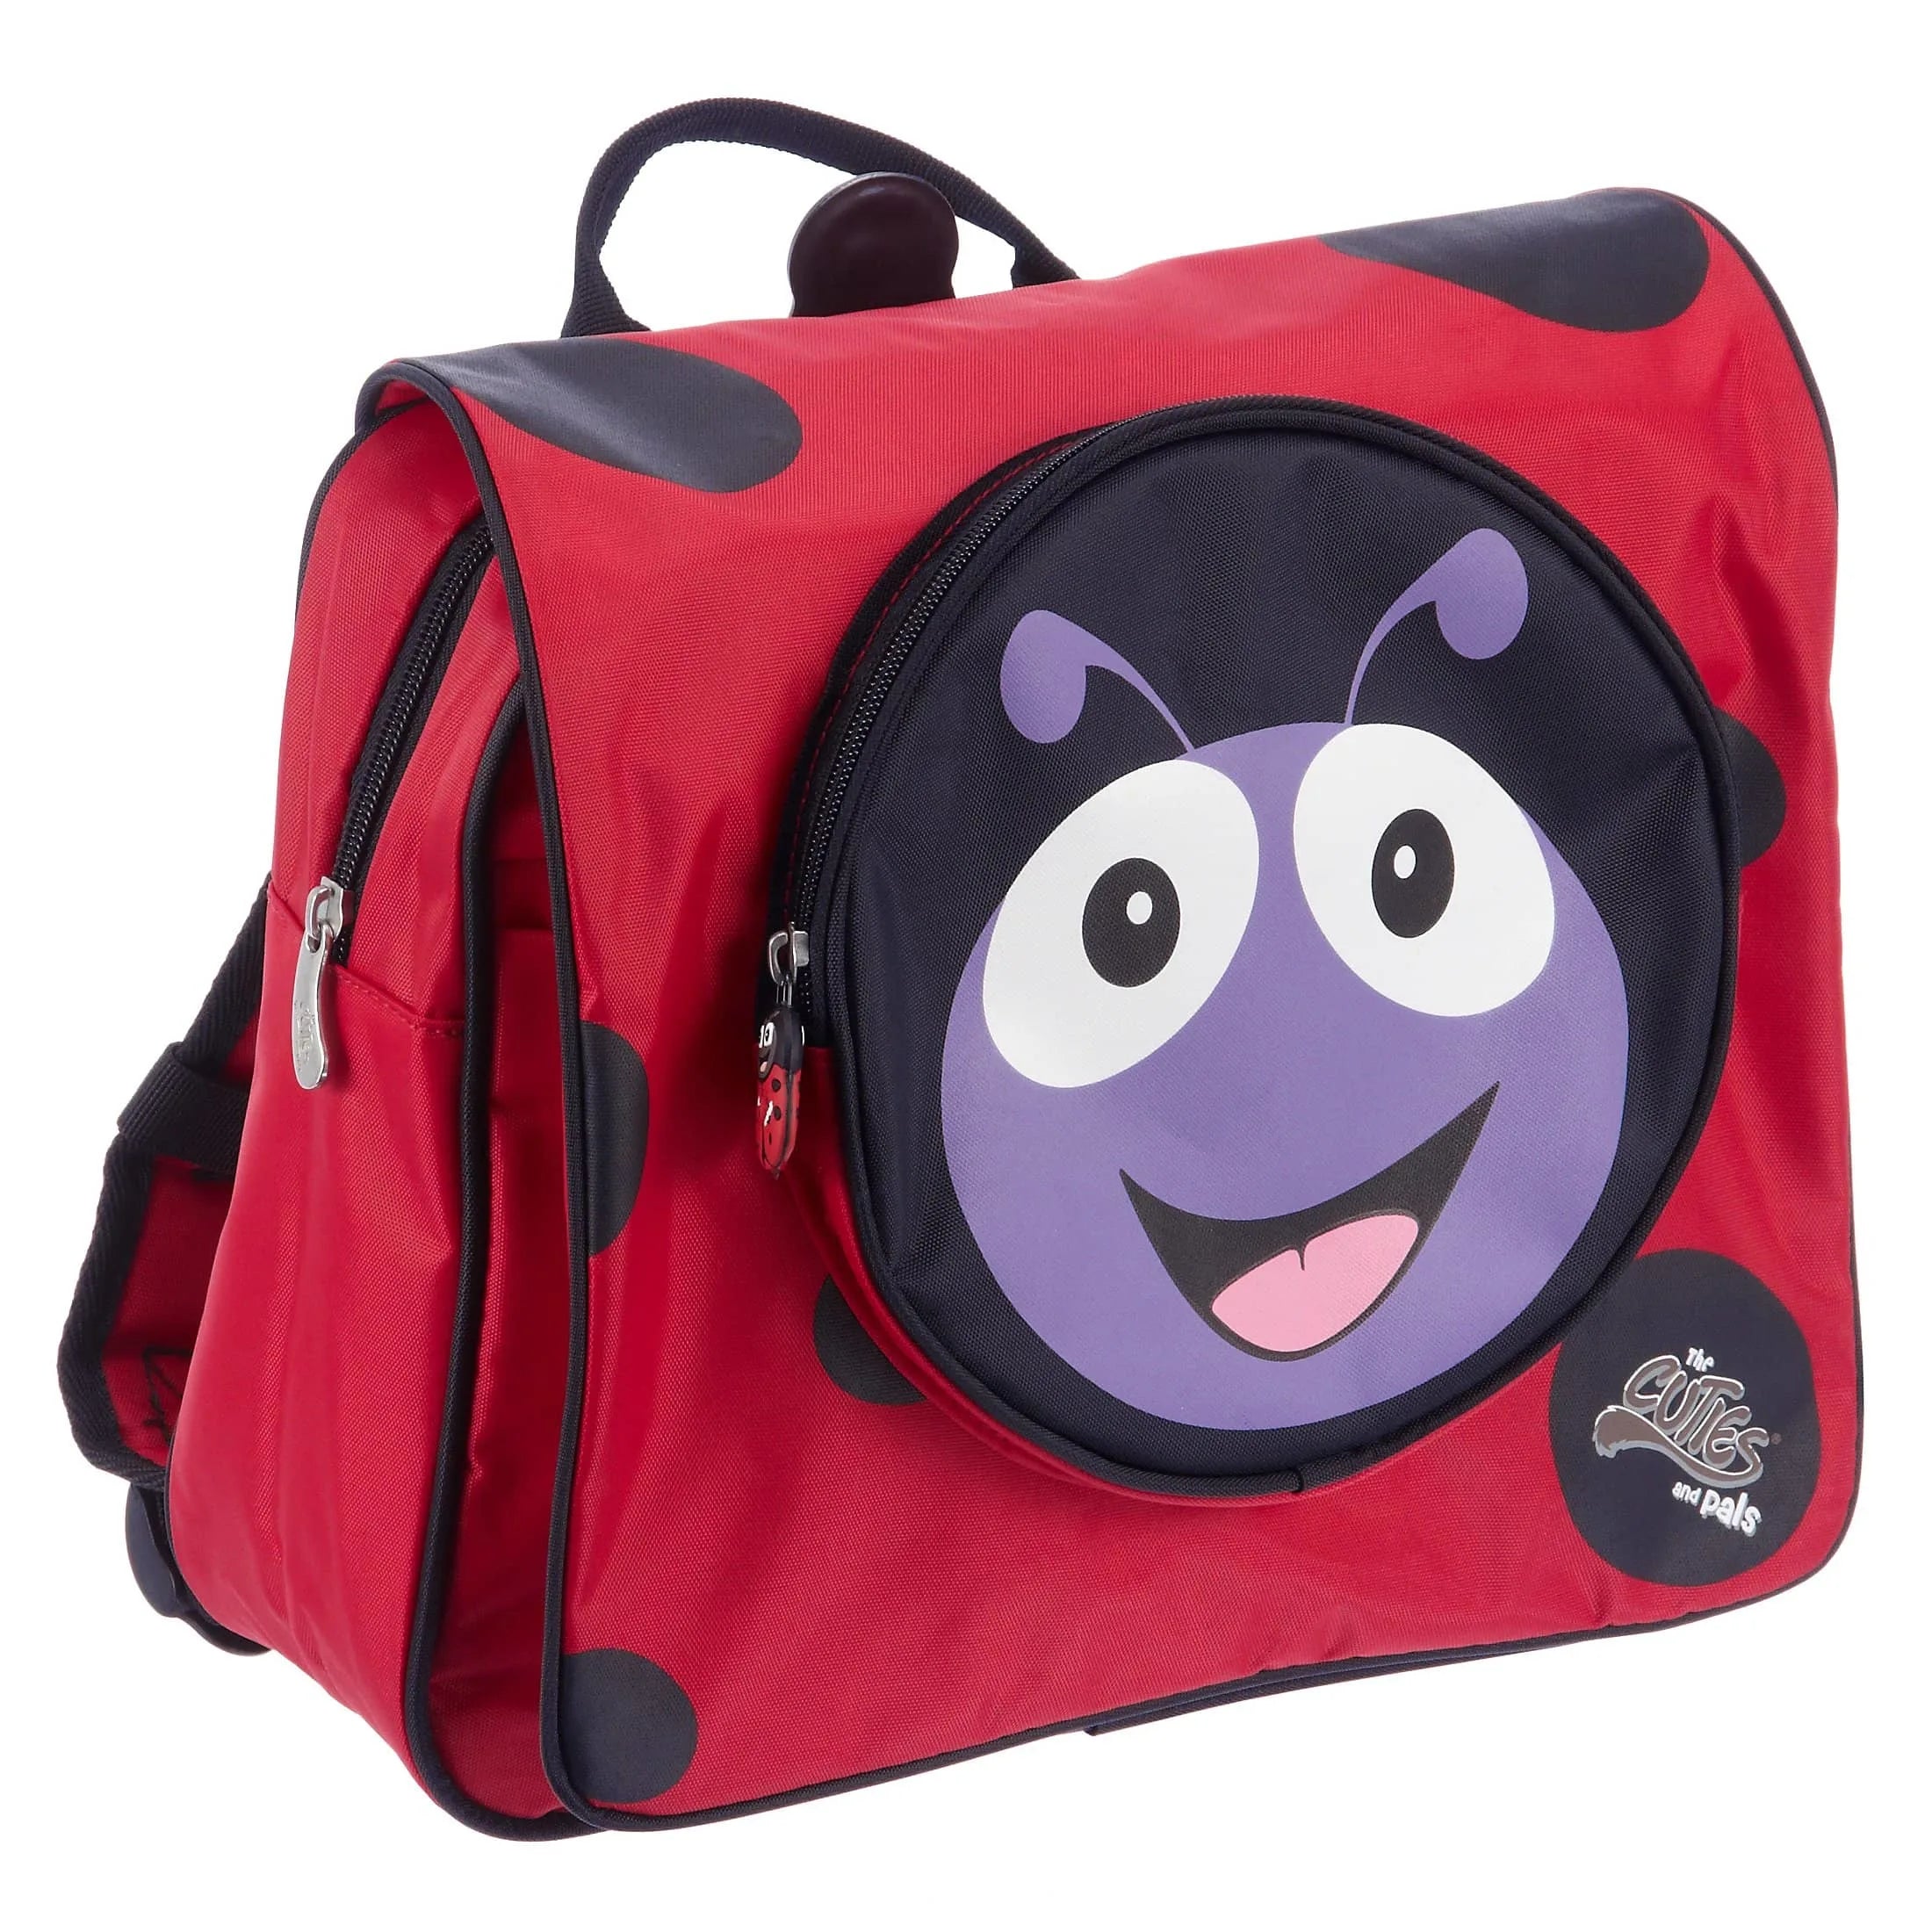 The Cuties and Pals Soft Cuties backpack 30 cm - Dino